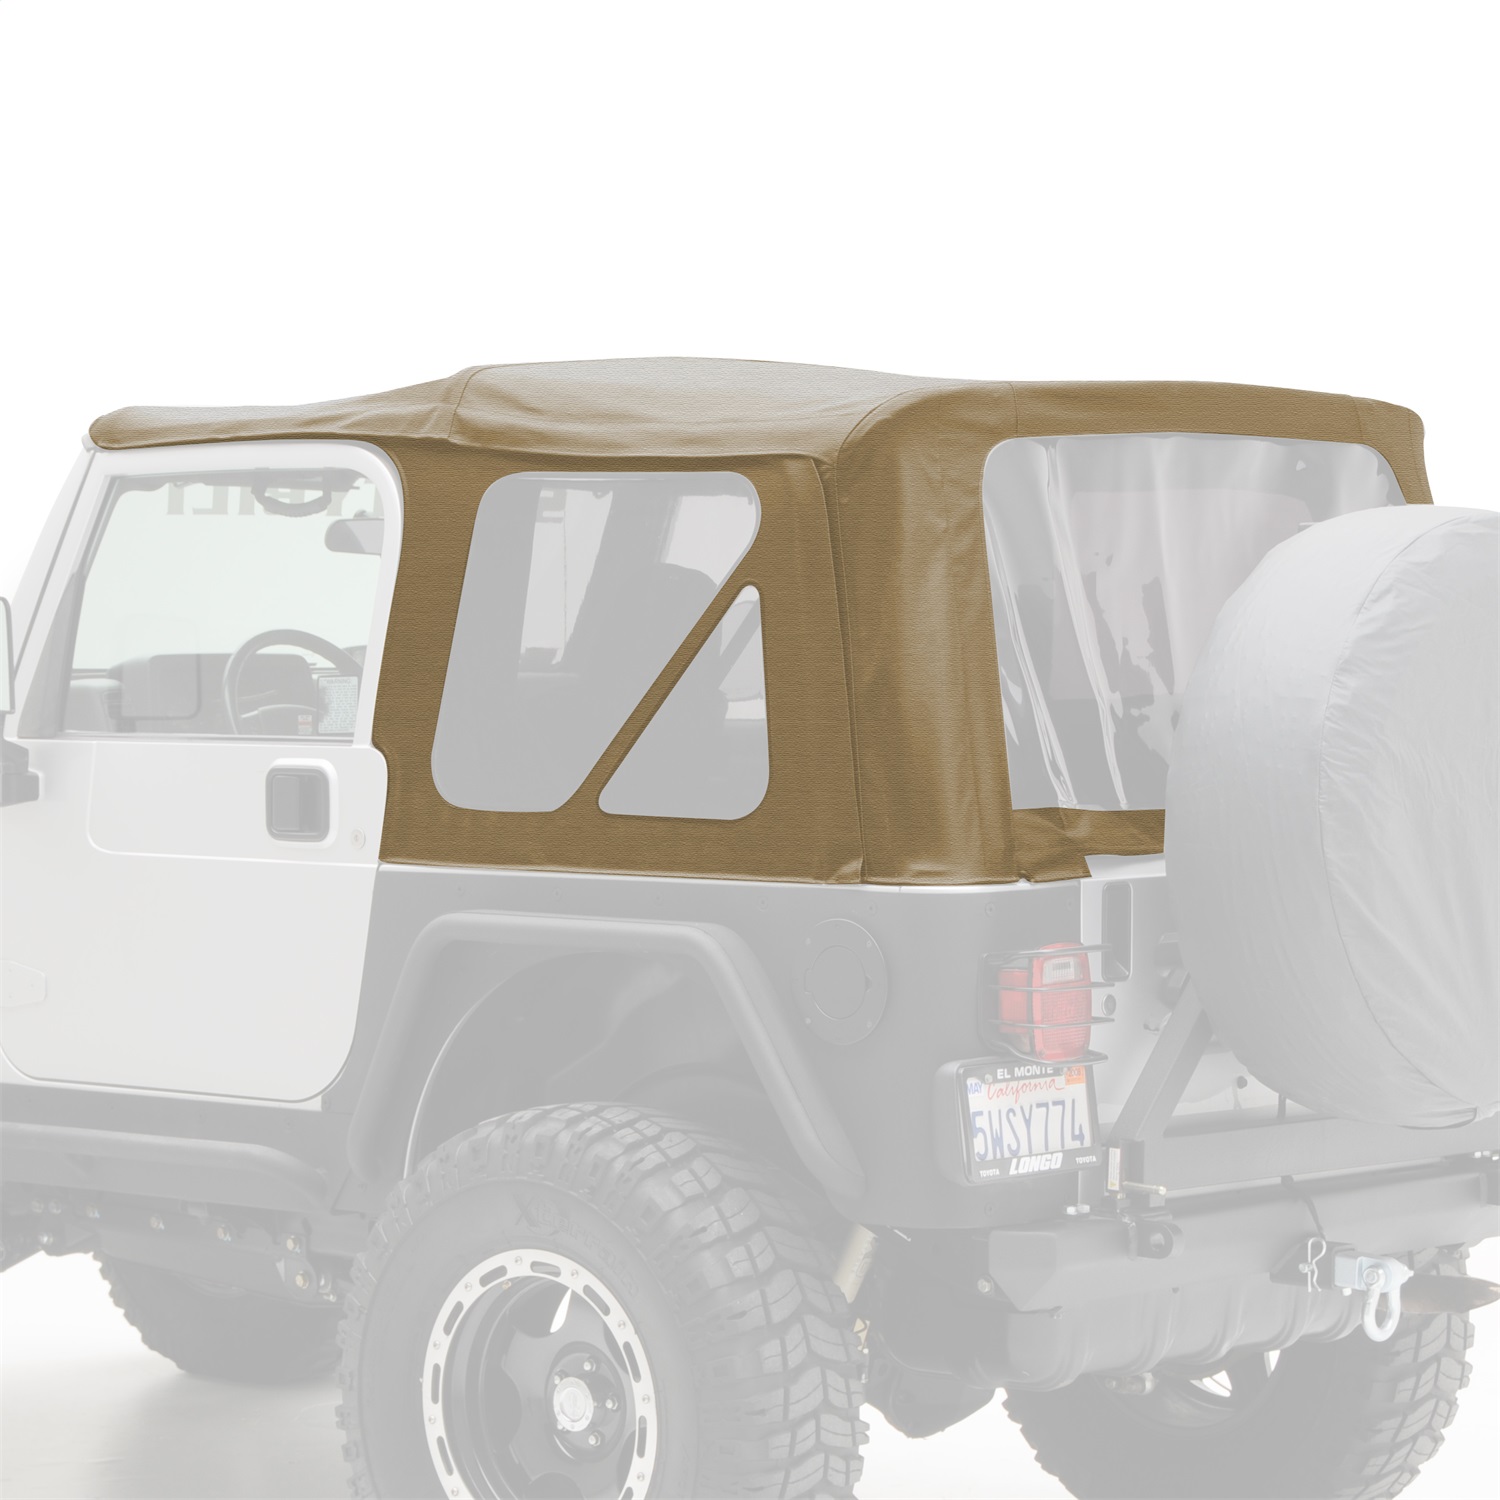 Smittybilt 9970217 Replacement Soft Top Fits 97-06 Wrangler (TJ)